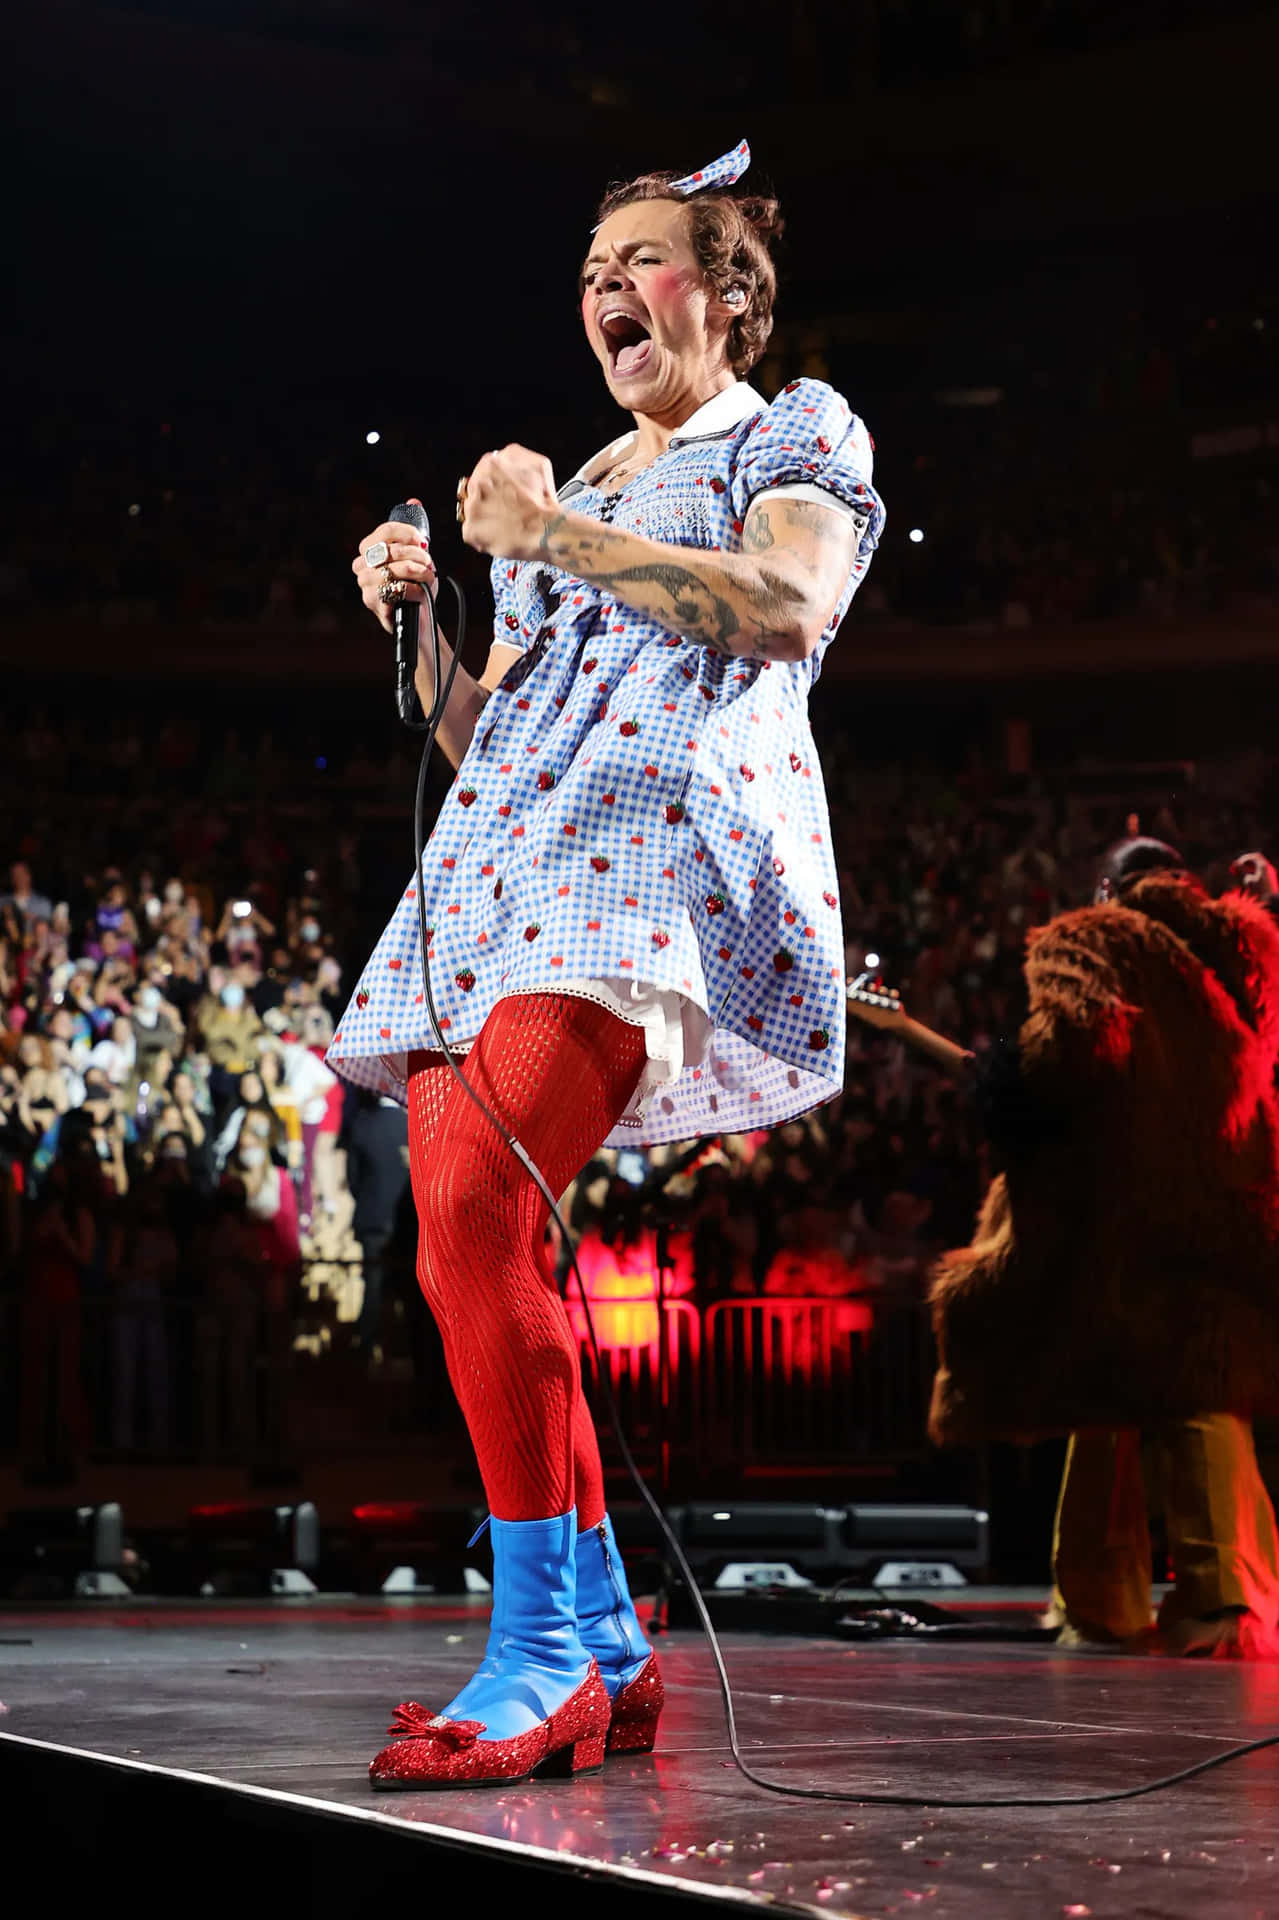 Harry Styles Performing at the 2021 British Vogue Fashion Show